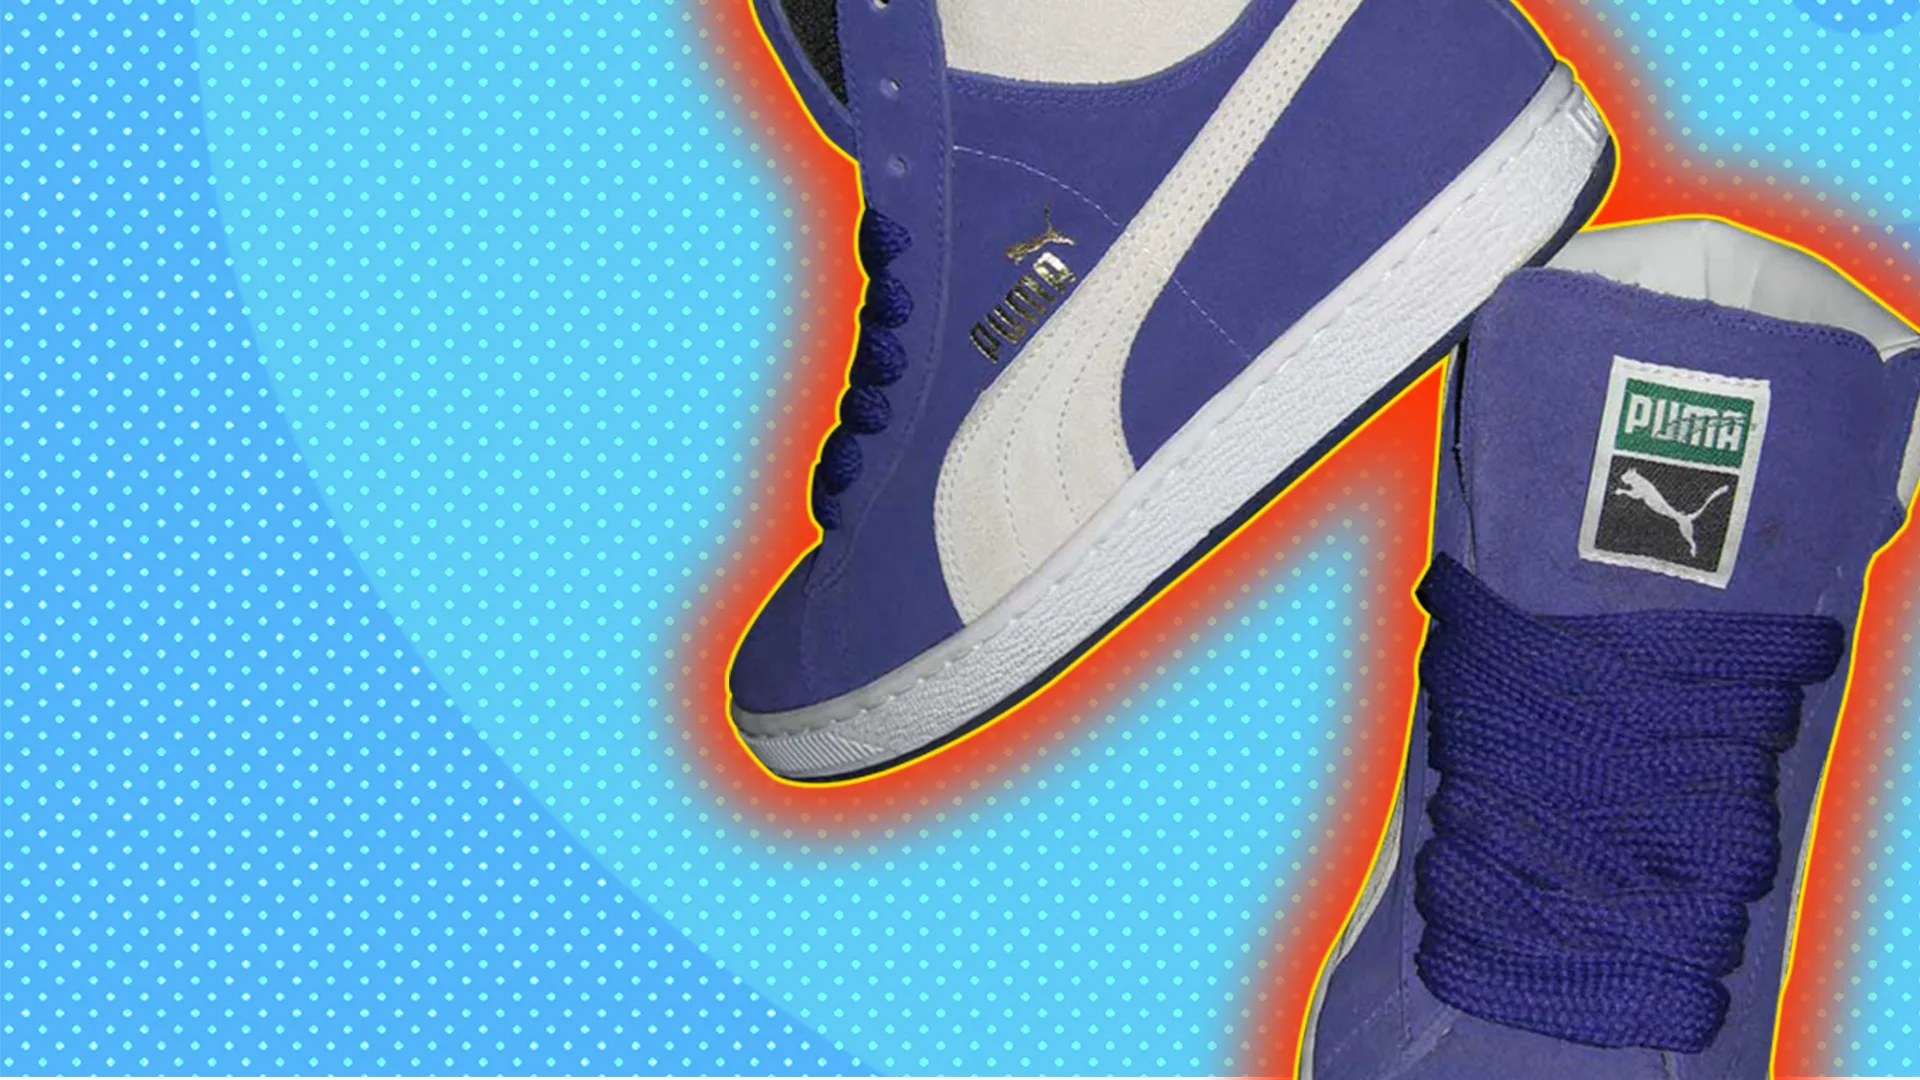 Puma high tops with a polkadot background and a glow around the image